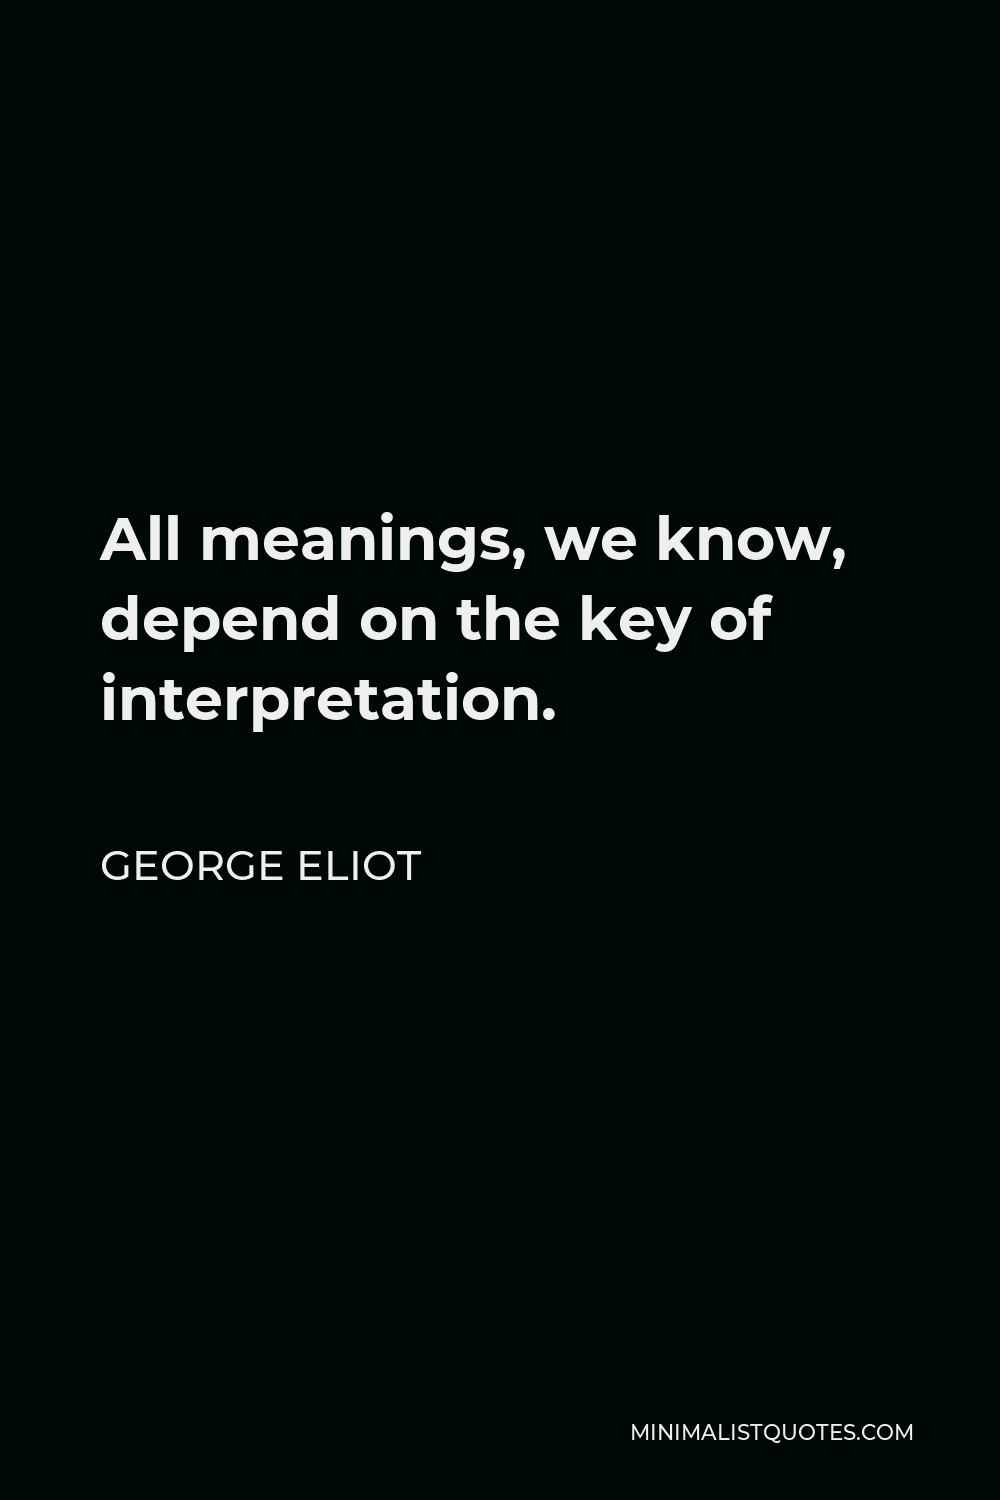 George Eliot Quote - All meanings, we know, depend on the key of interpretation.